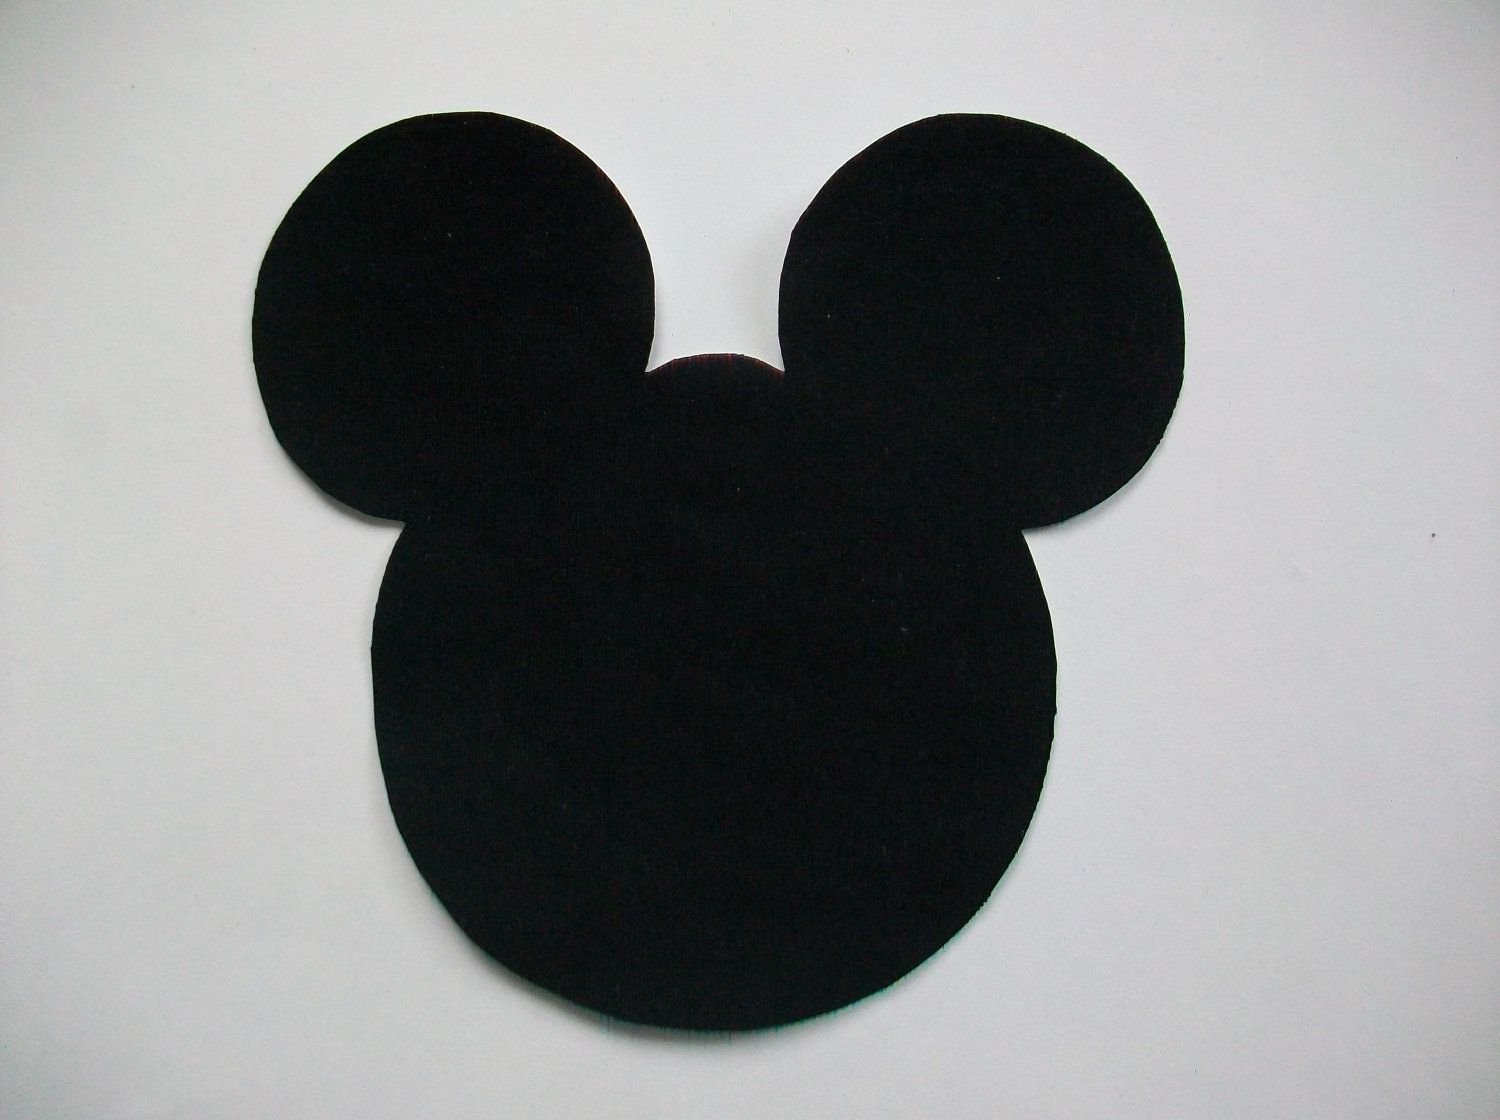 Mickey Mouse Head 1232 Hd Wallpapers in Cartoons - Imagesci.com